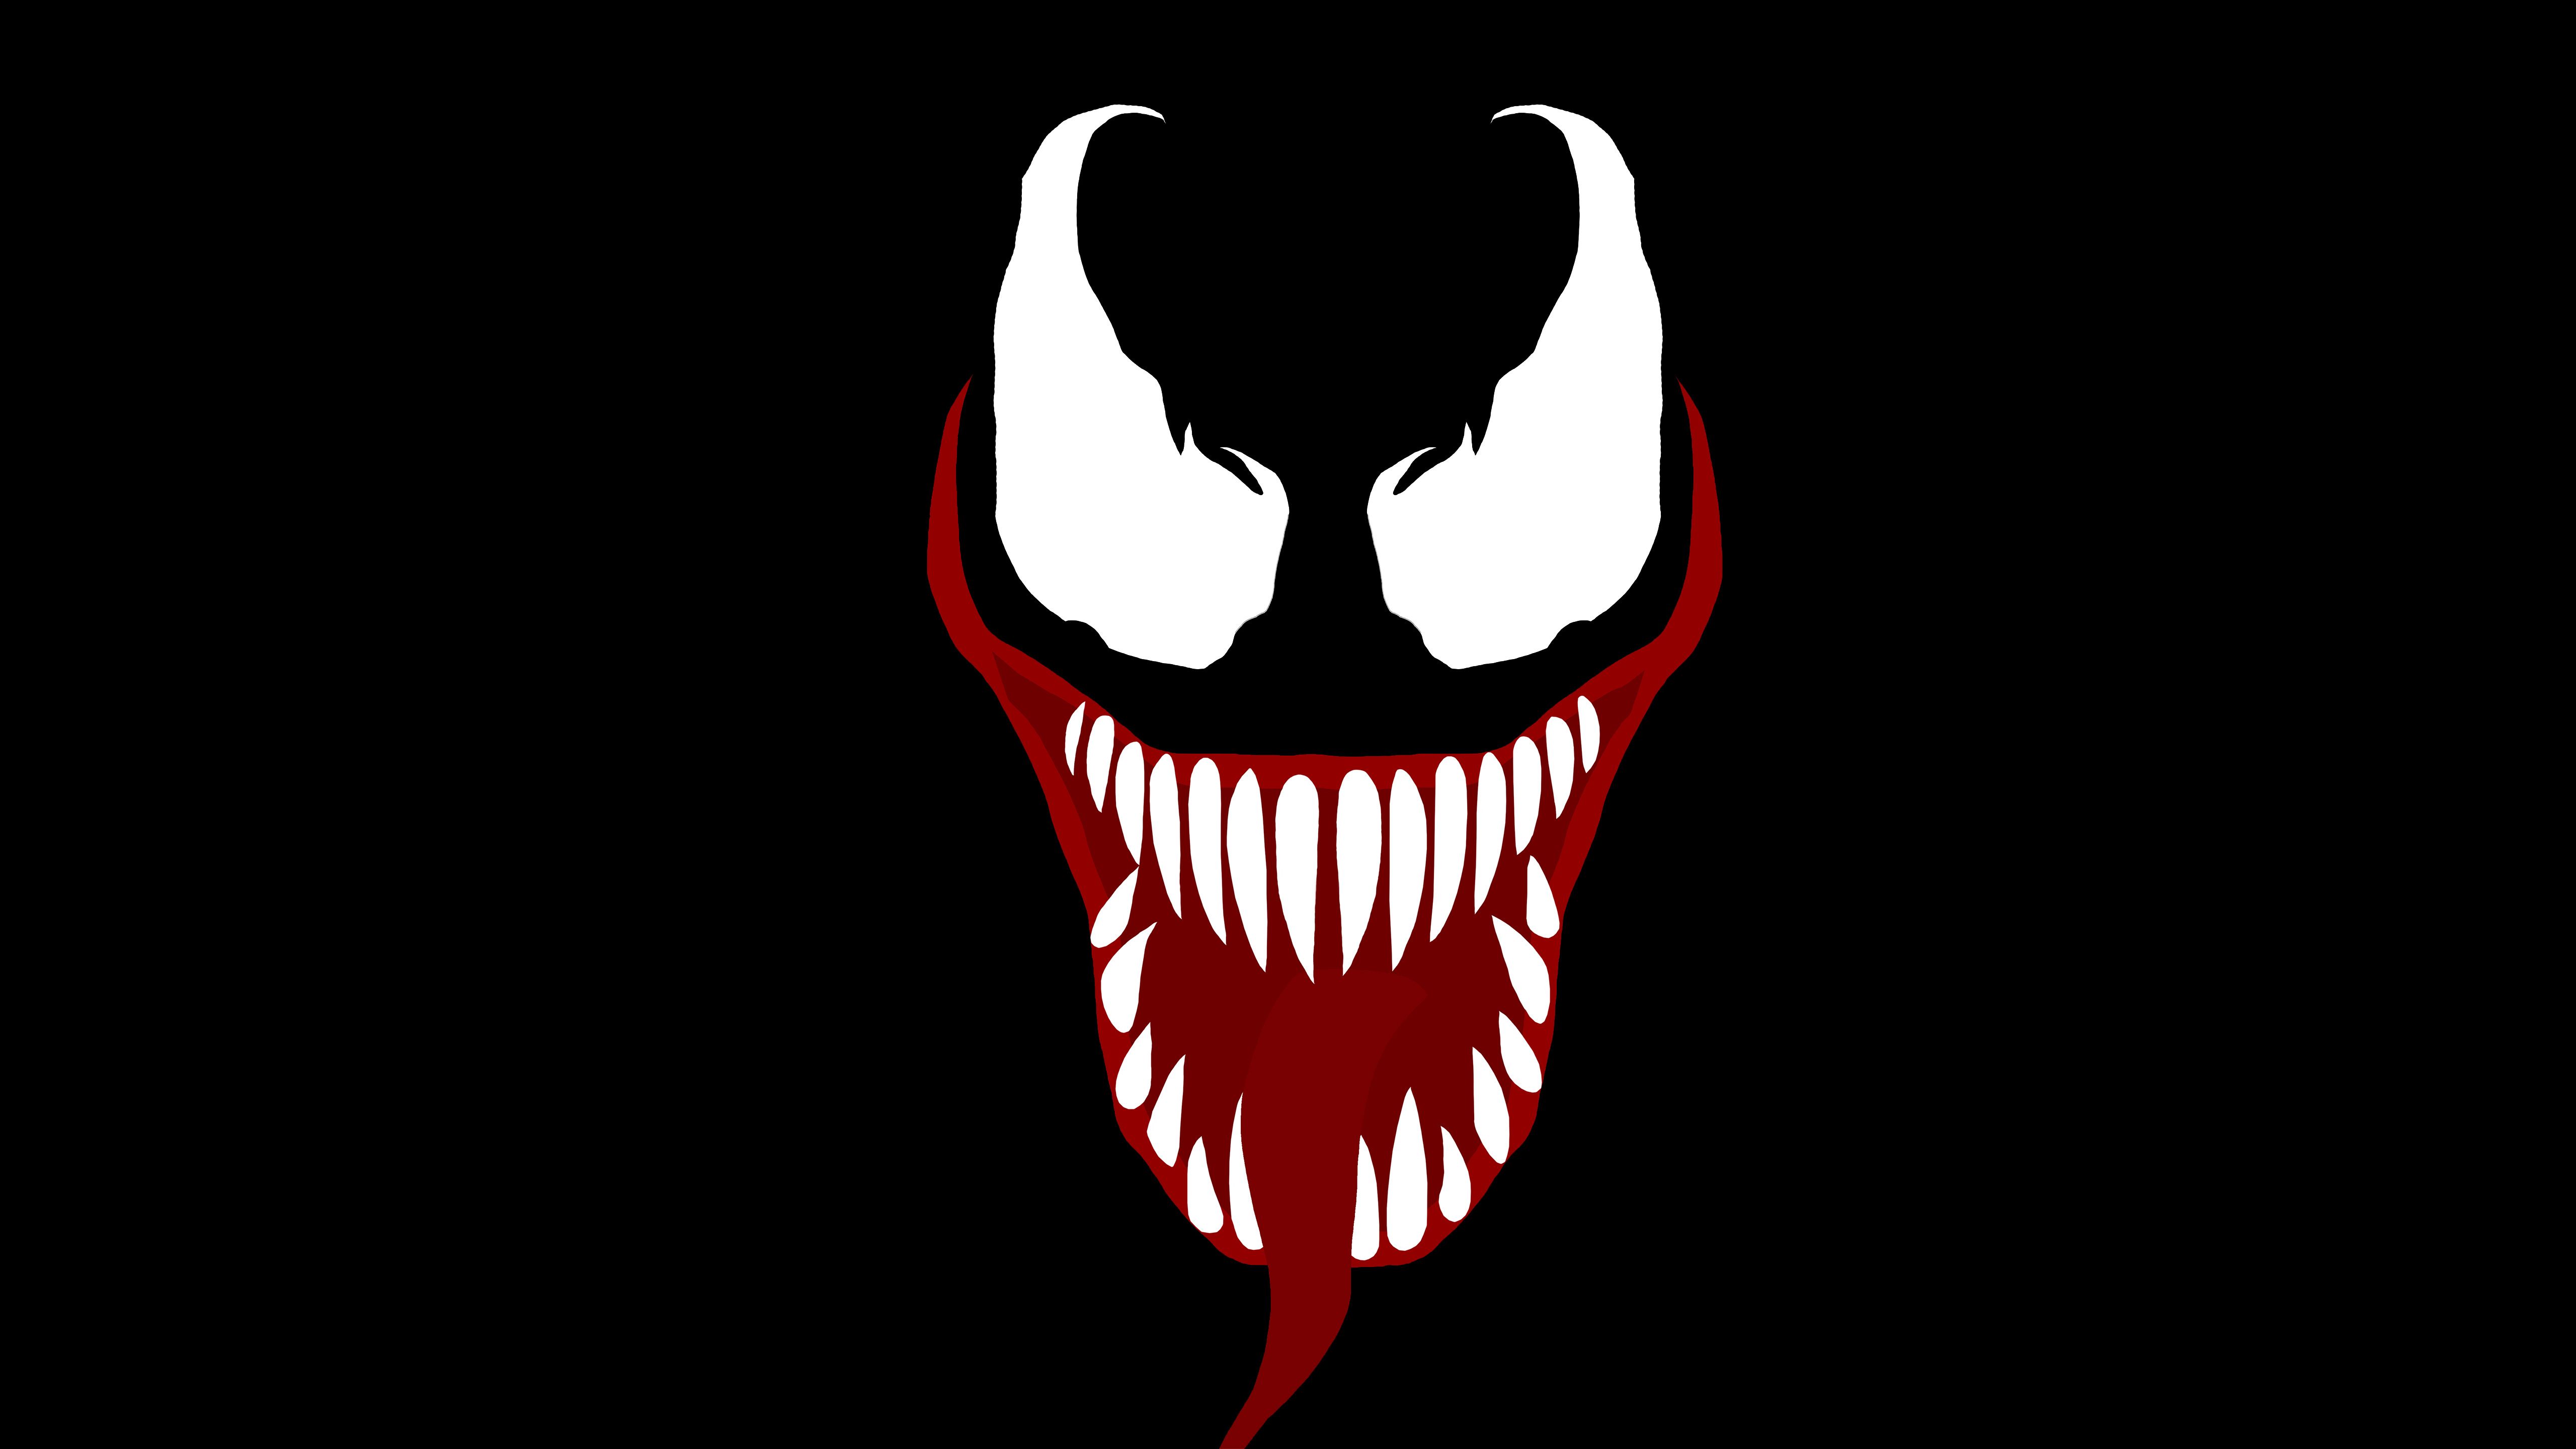 Venom download the new for ios